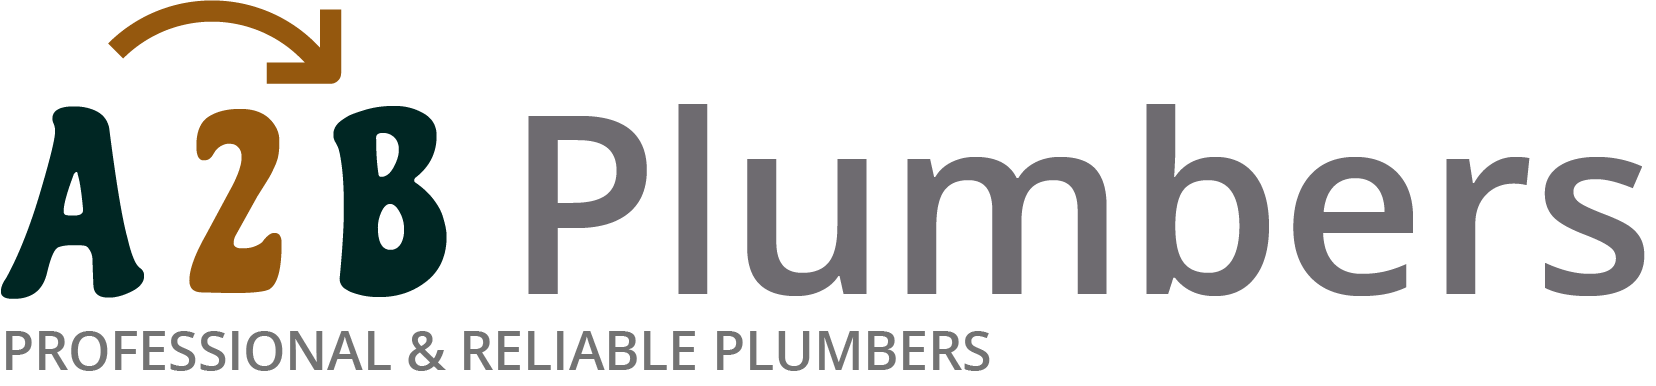 If you need a boiler installed, a radiator repaired or a leaking tap fixed, call us now - we provide services for properties in Lower Sunbury and the local area.